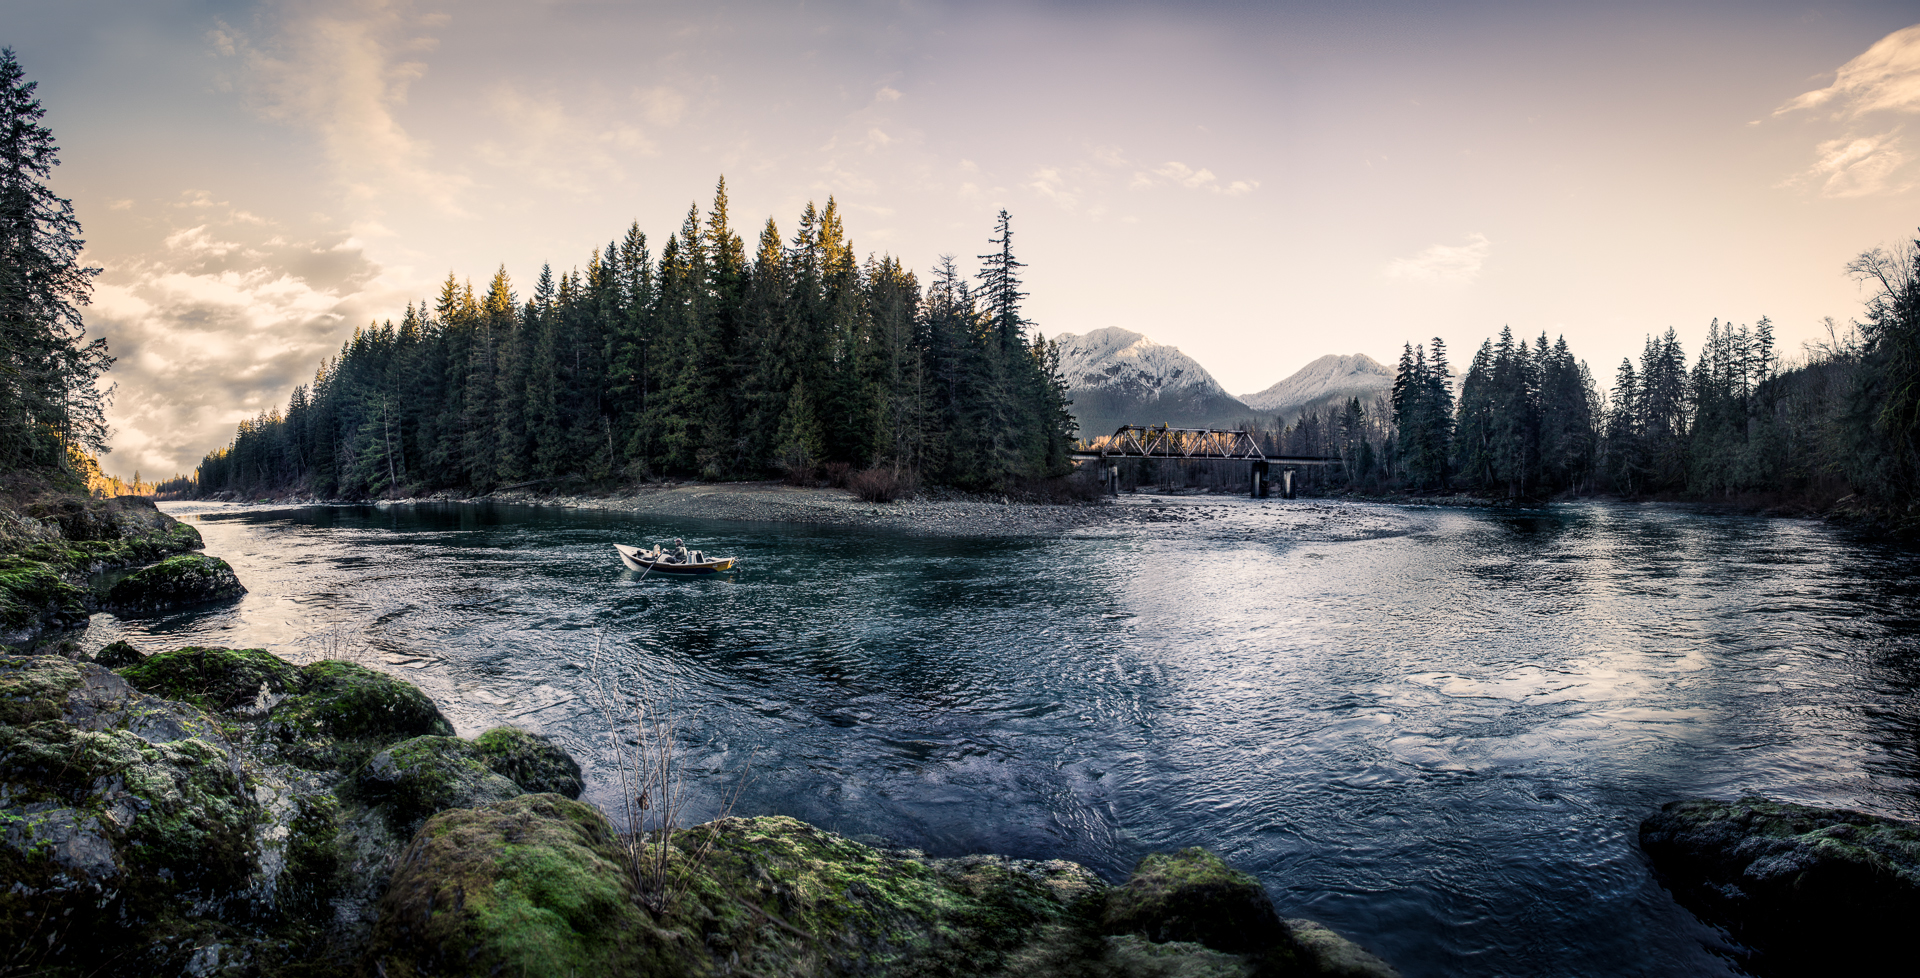 Skykomish River Fly Fishing Drift Boat excursion/ Adventure